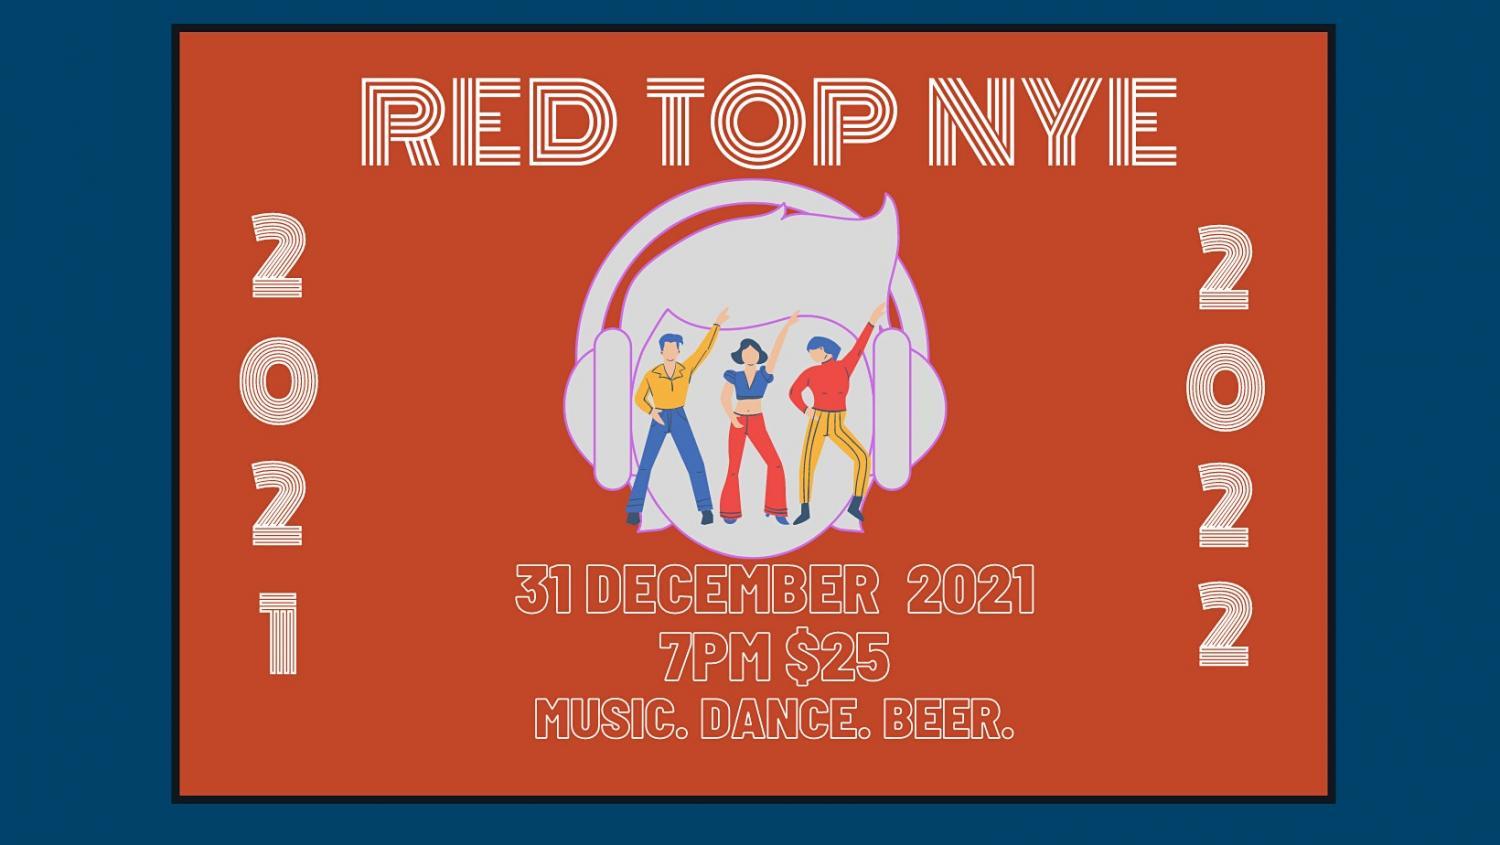 RED TOP NYE